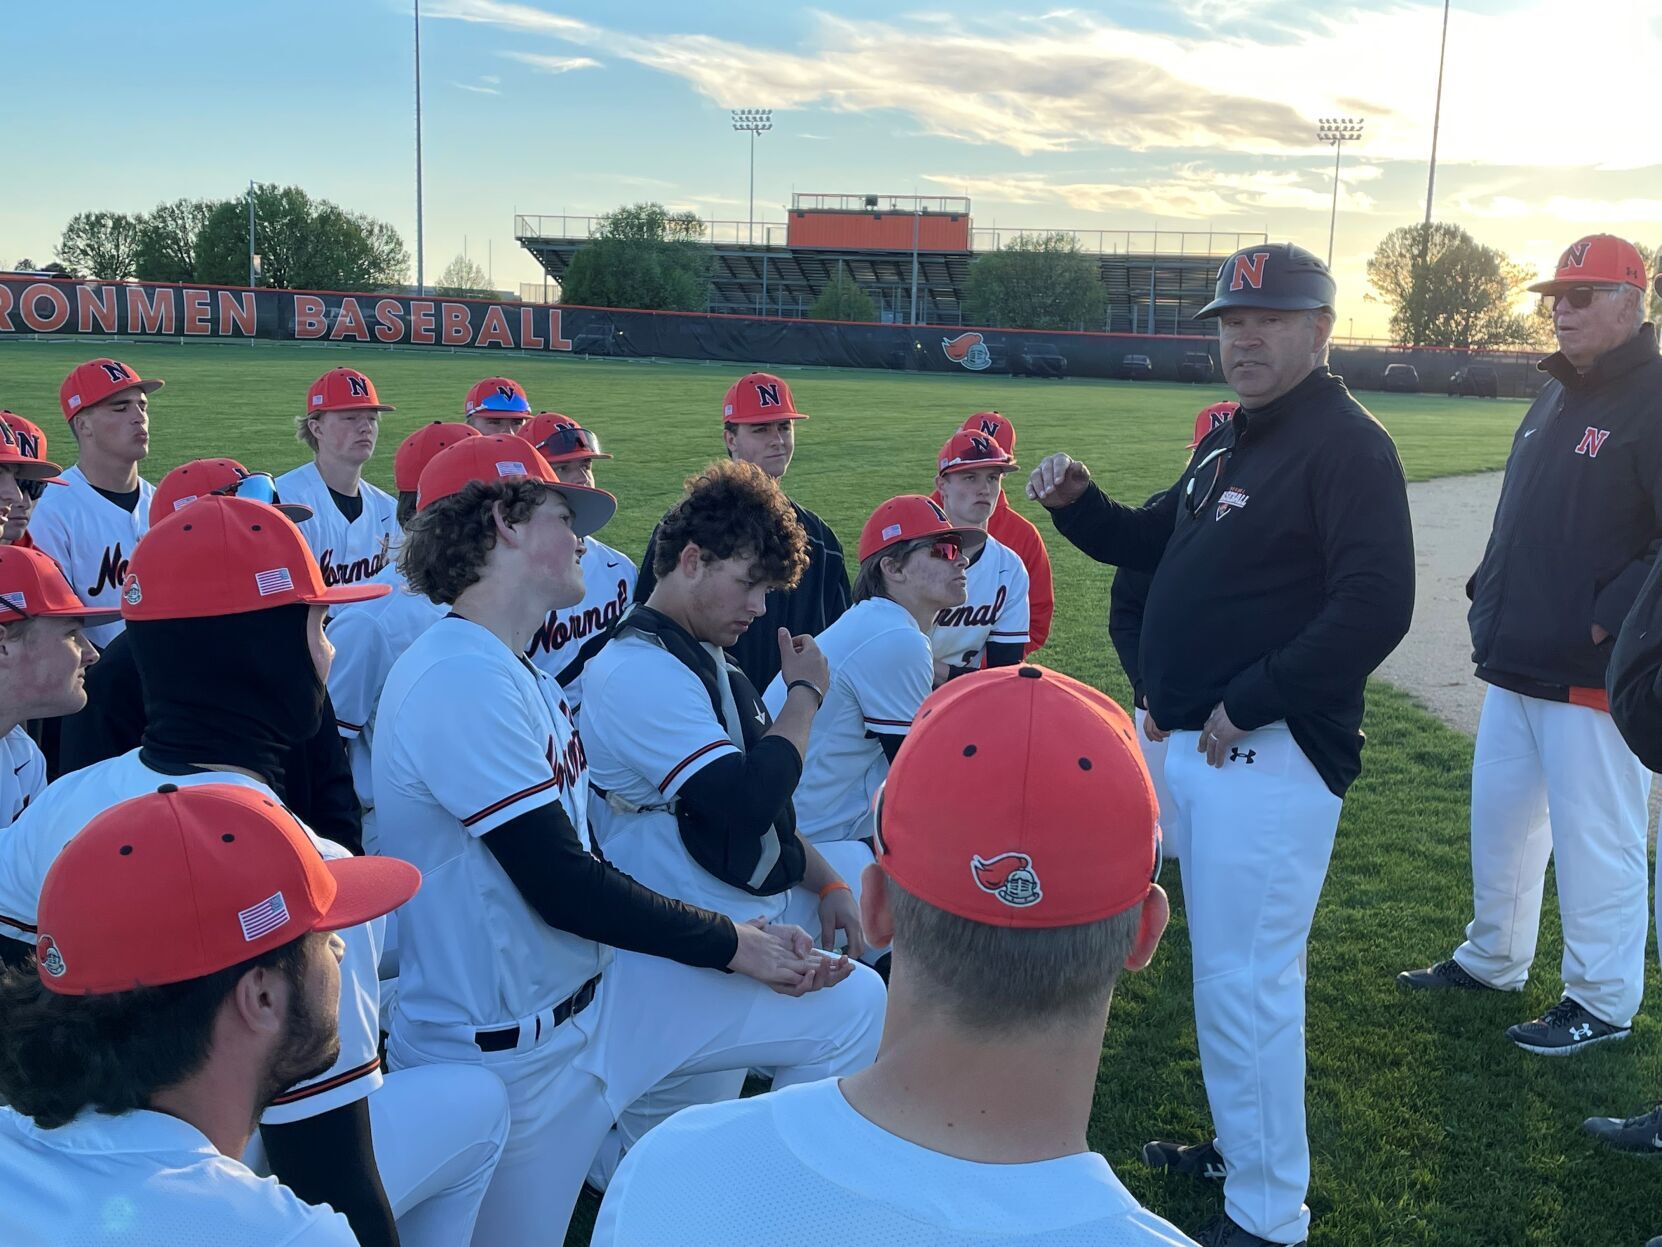 Owen Cavanaugh shines as Normal Community dominates Normal West with a 9-4 victory